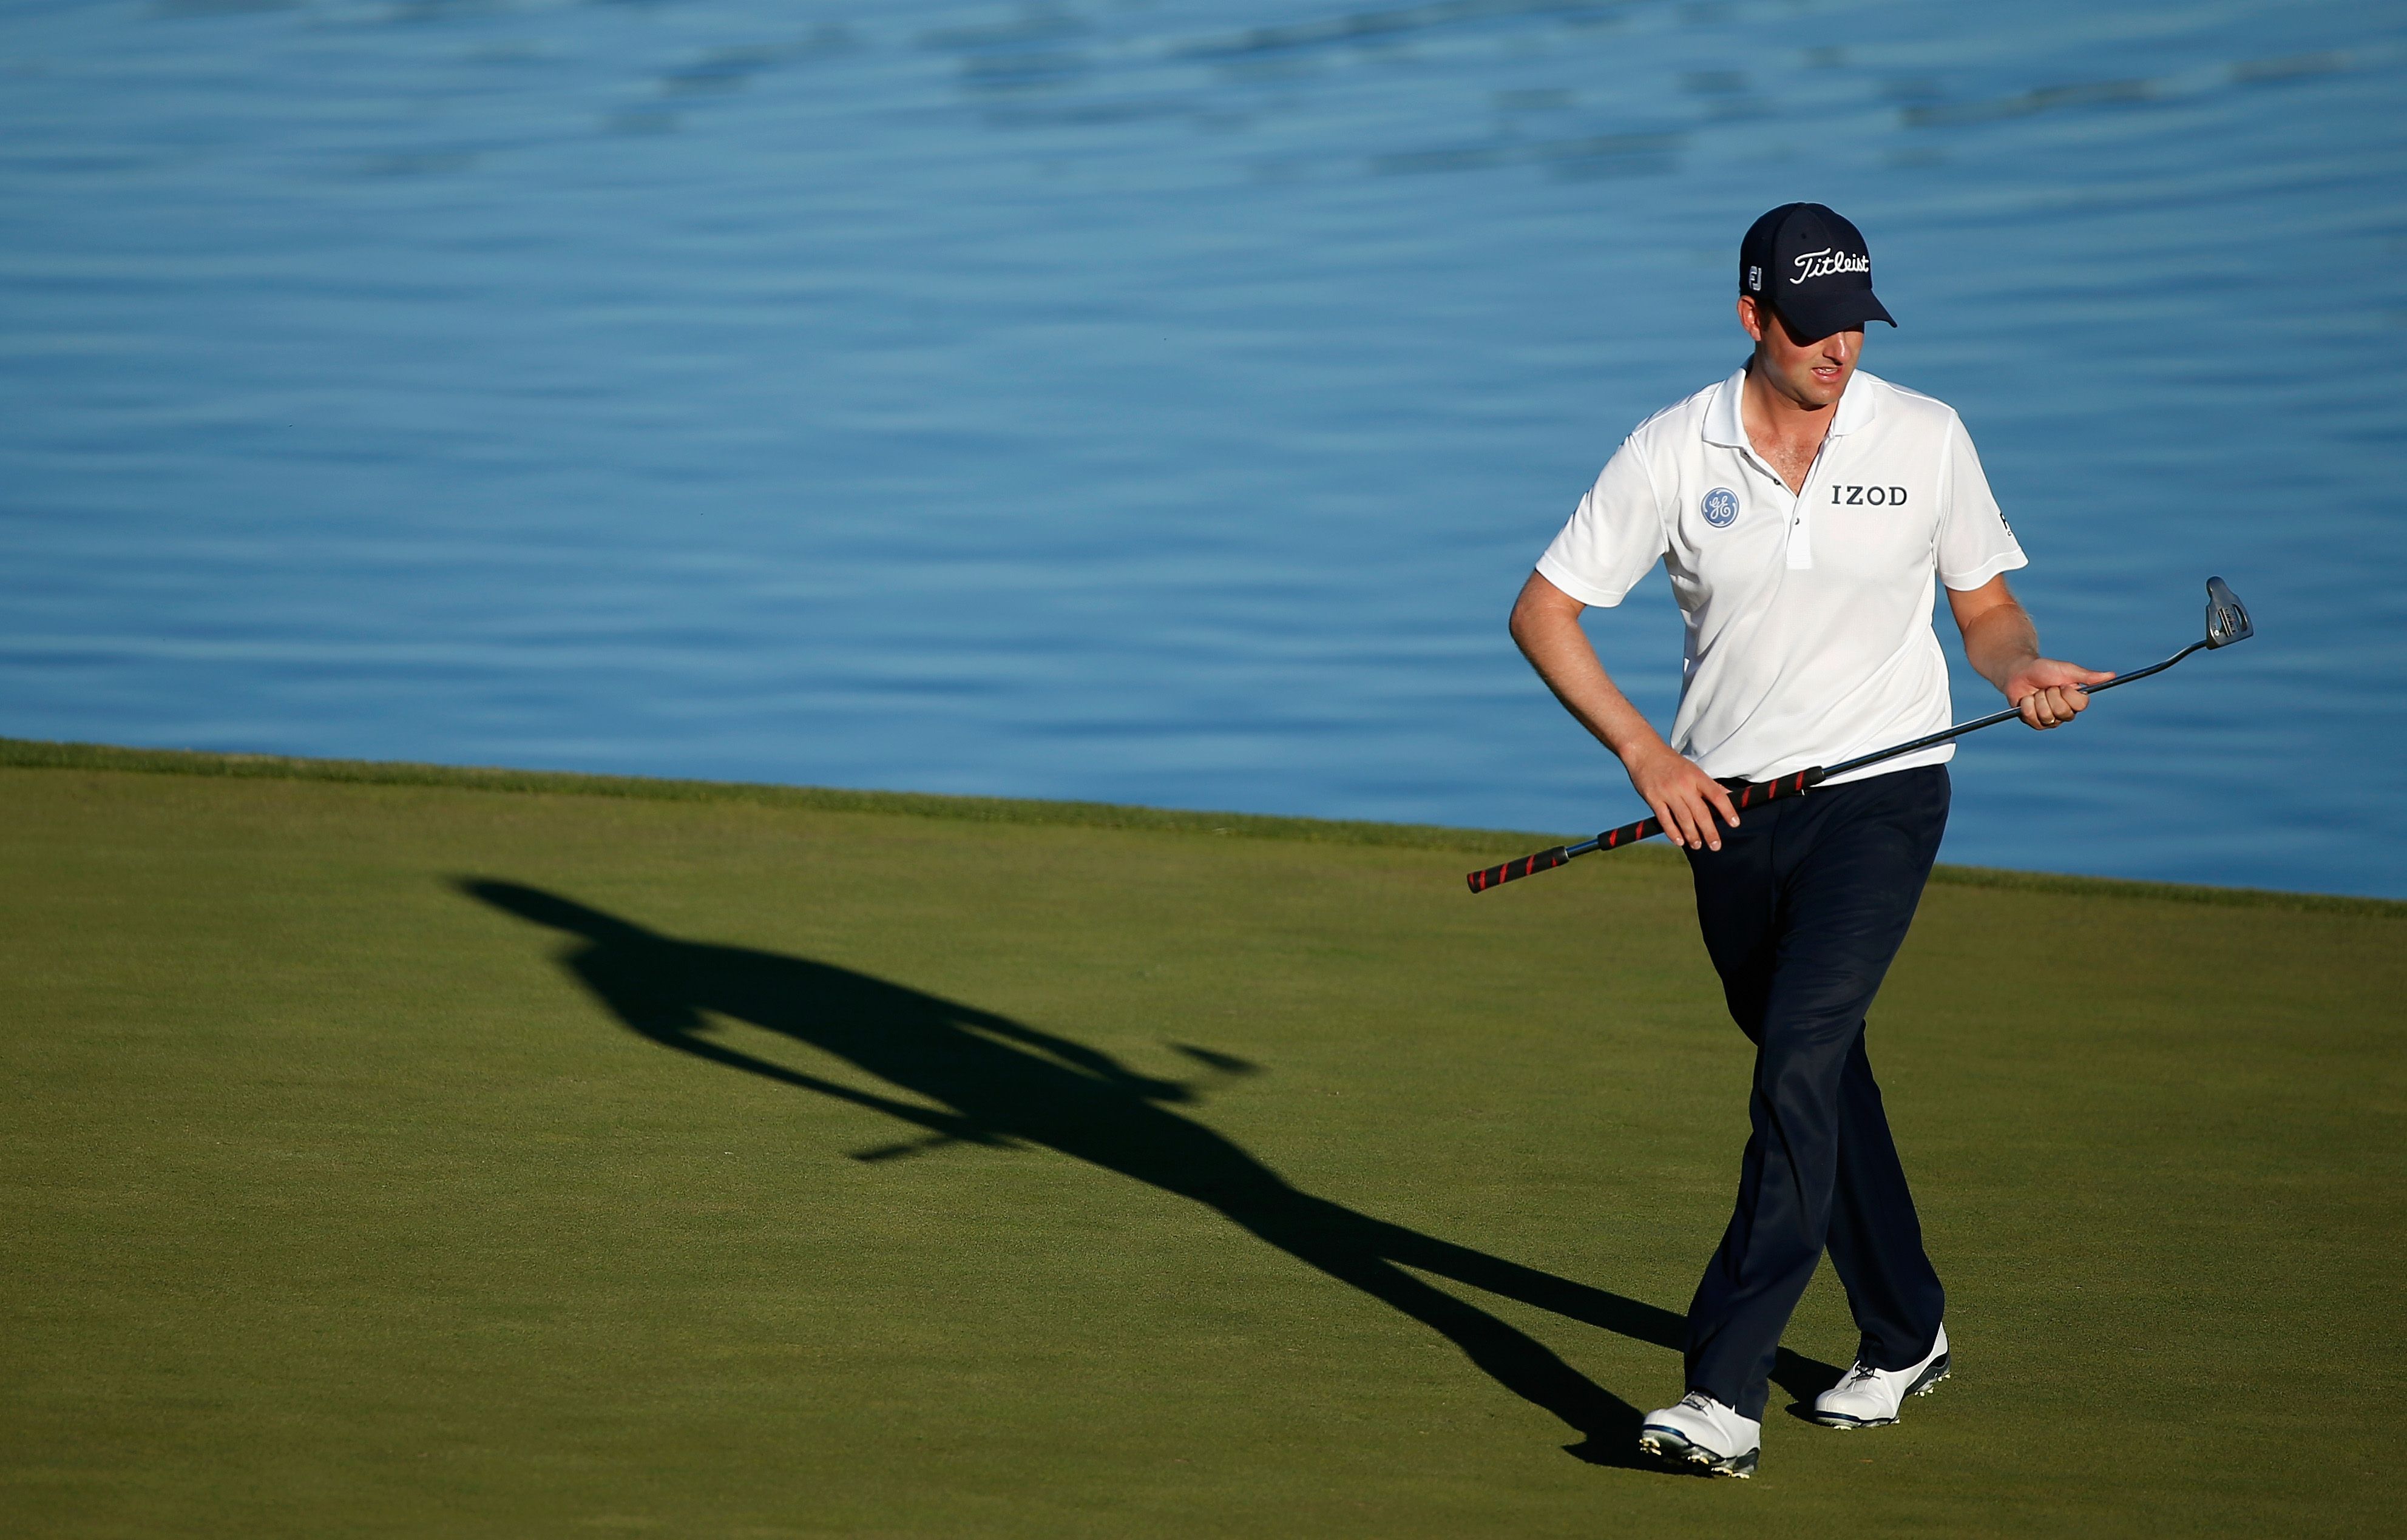 Webb Simpson examined his putter on the 16th green during the third round of the Shriners Hospitals for Children Open in Las Vegas. Photo: AFP